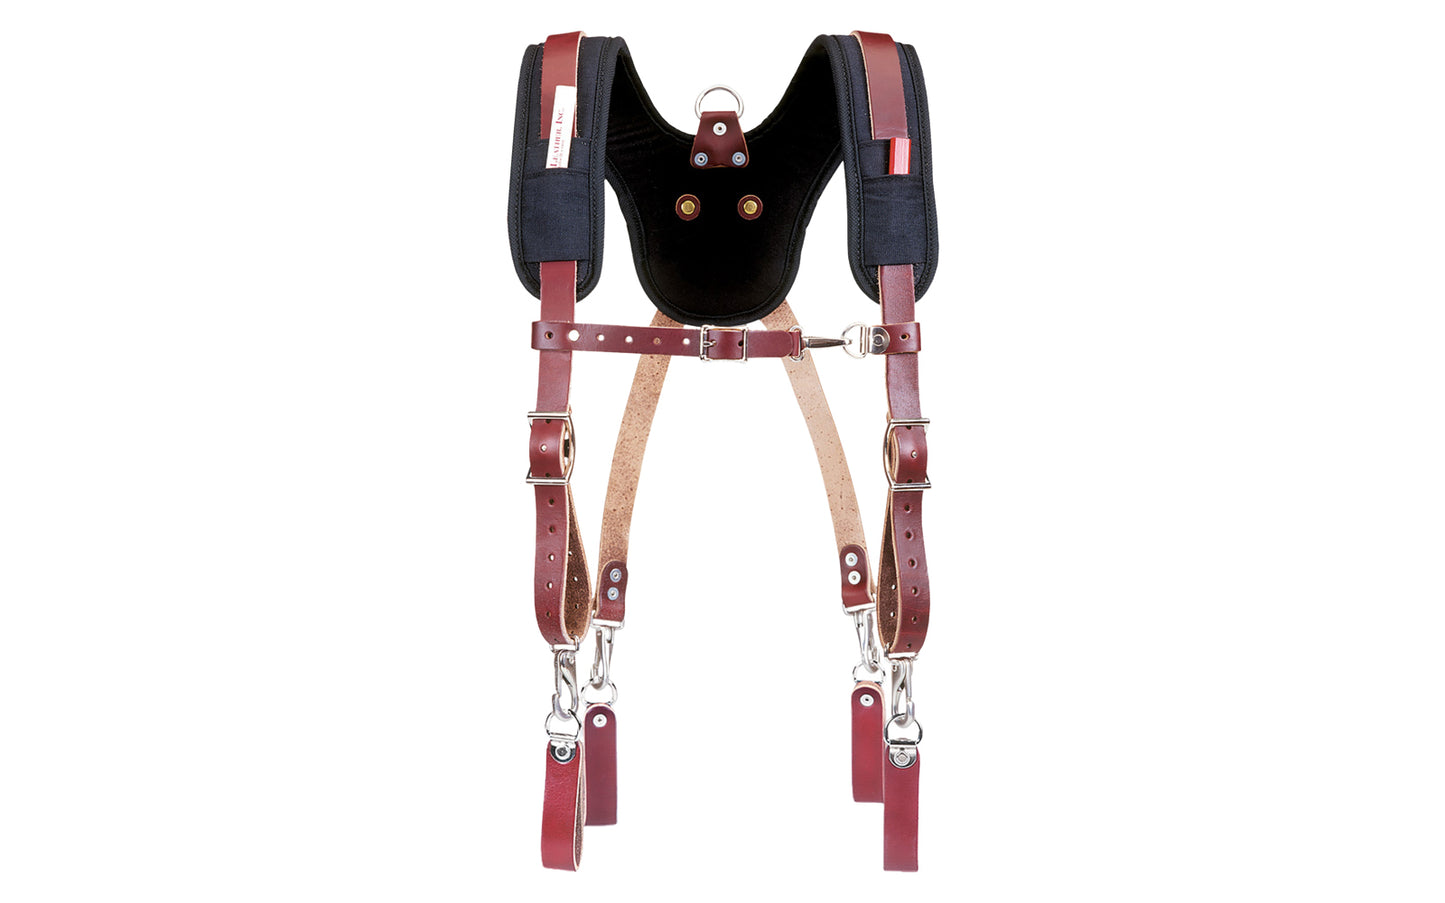 Model No. 5055 - Occidental Leather "Stronghold" Suspension System has very comfortable padded & the contoured yoke relieves hips & lower back strain. Pockets for Pencils or Clip-On Items Located on Both Sides of System. Made of industrial nylon material & genuine leather. Padded Yoke Lined. 759244102406. Made in USA 